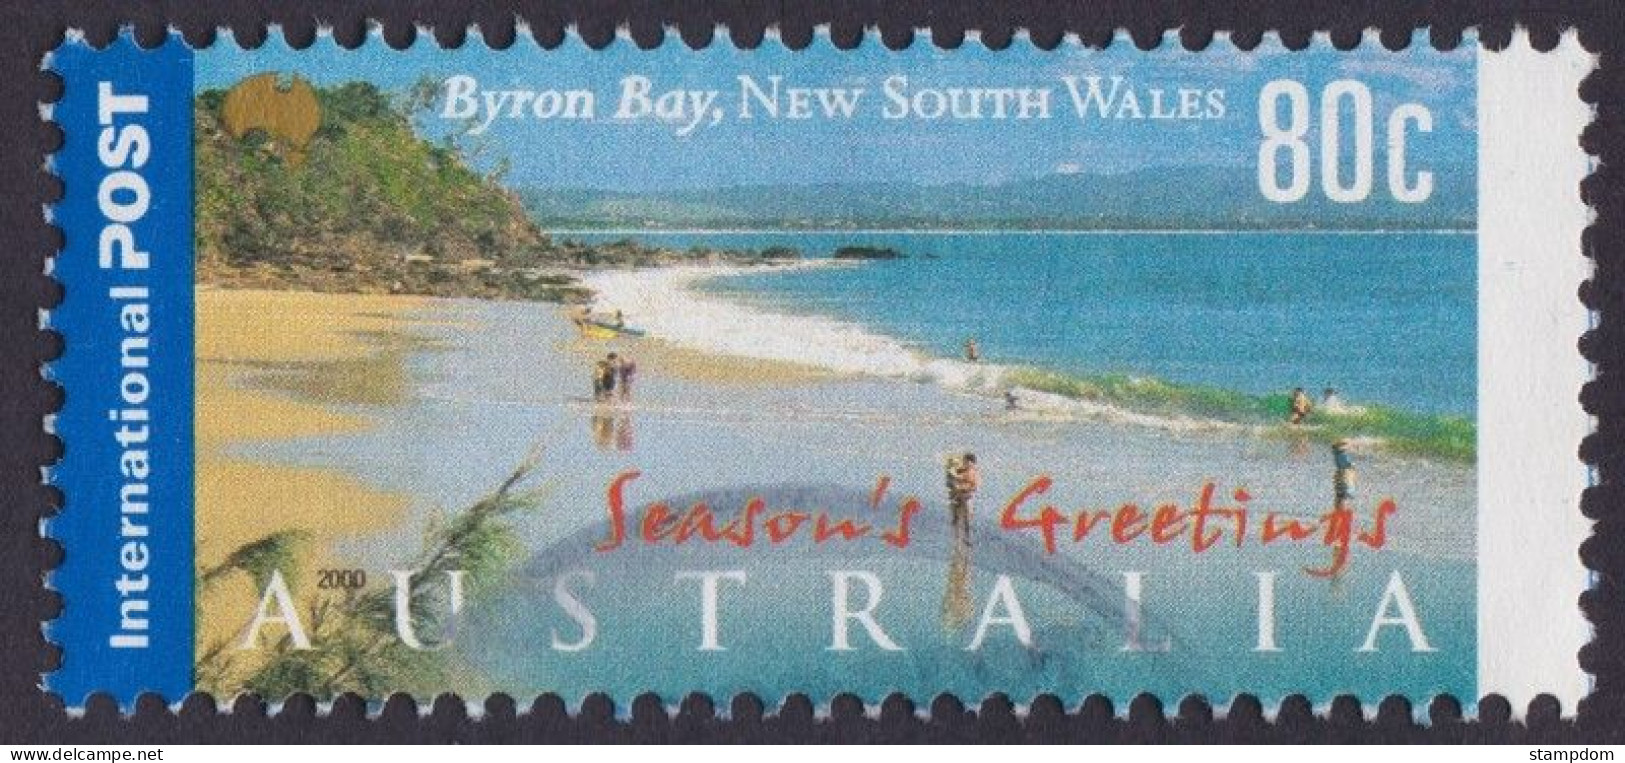 AUSTRALIA  2000 Tourist Attractions 80c Byron Bay Sc#1925 USED @O272 - Used Stamps